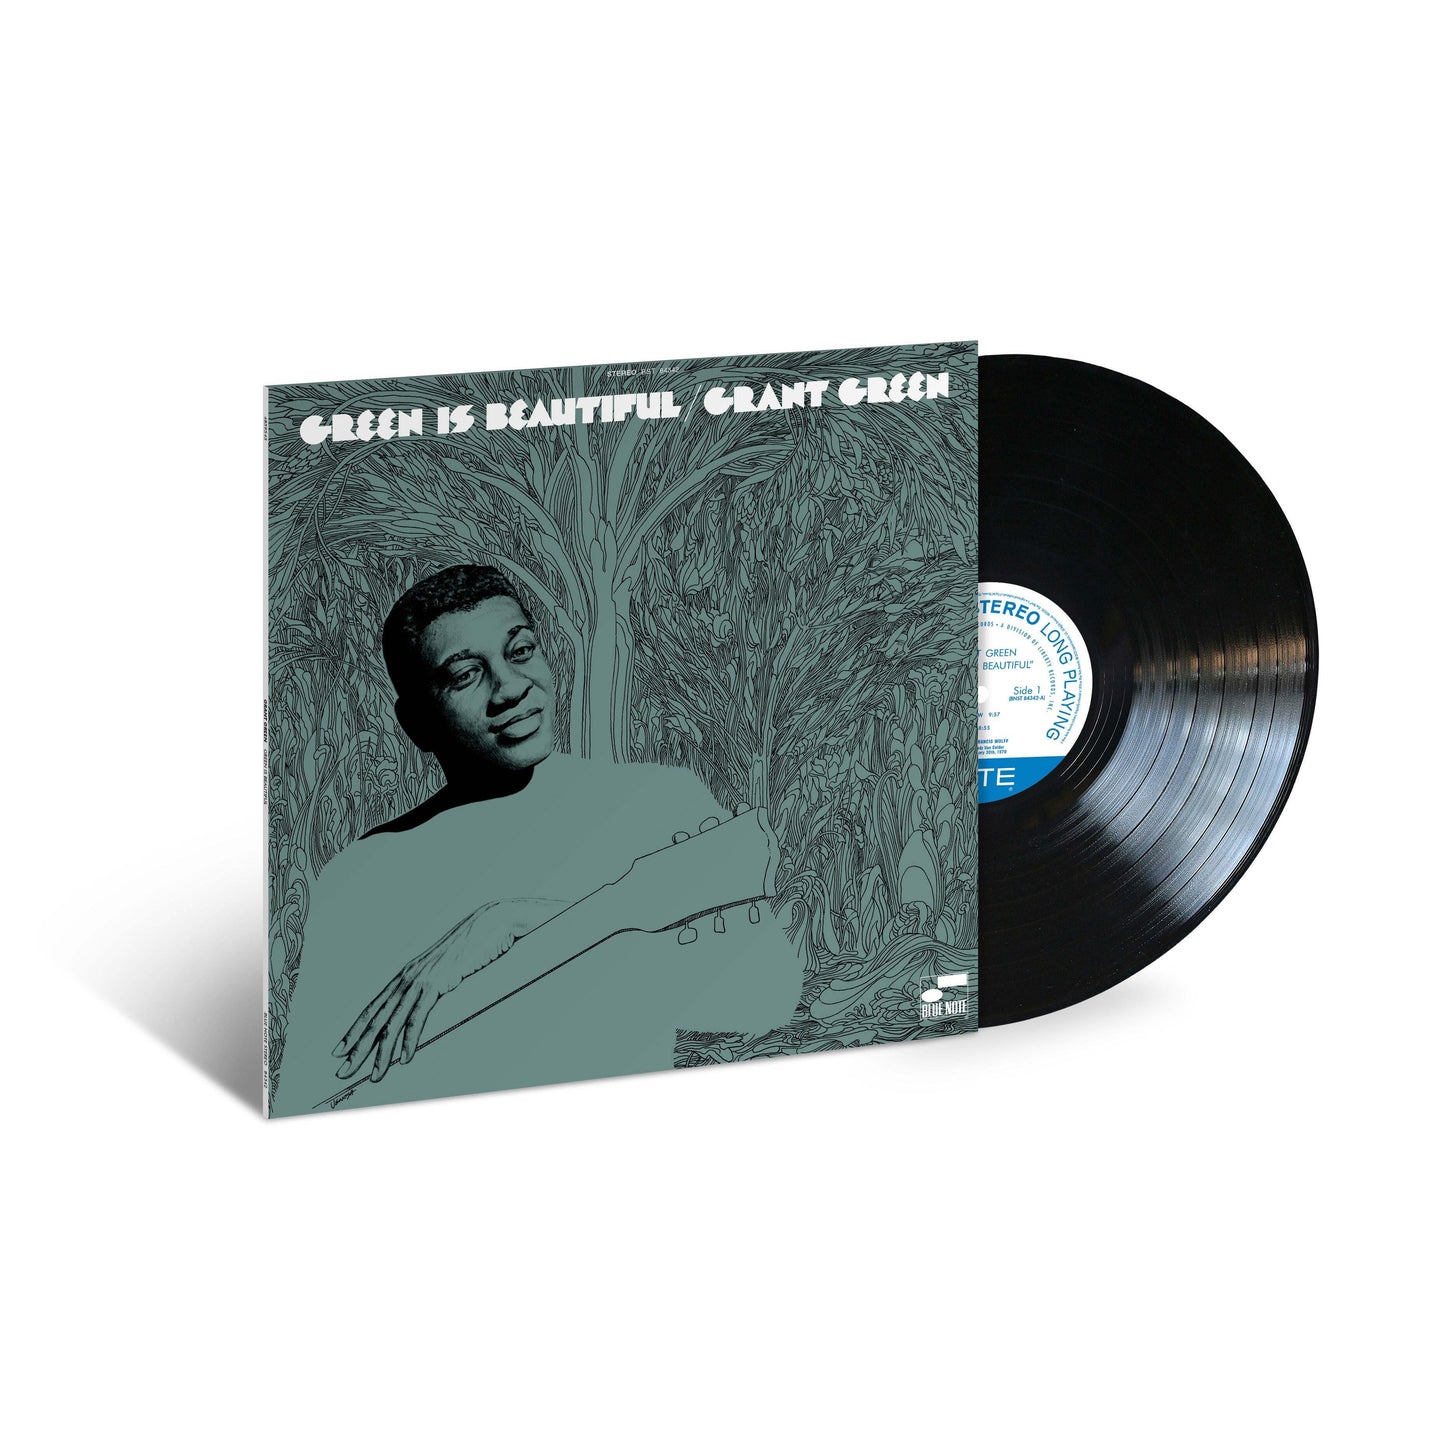 Grant Green - Green Is Beautiful | Buy the Vinyl LP from Flying Nun Records